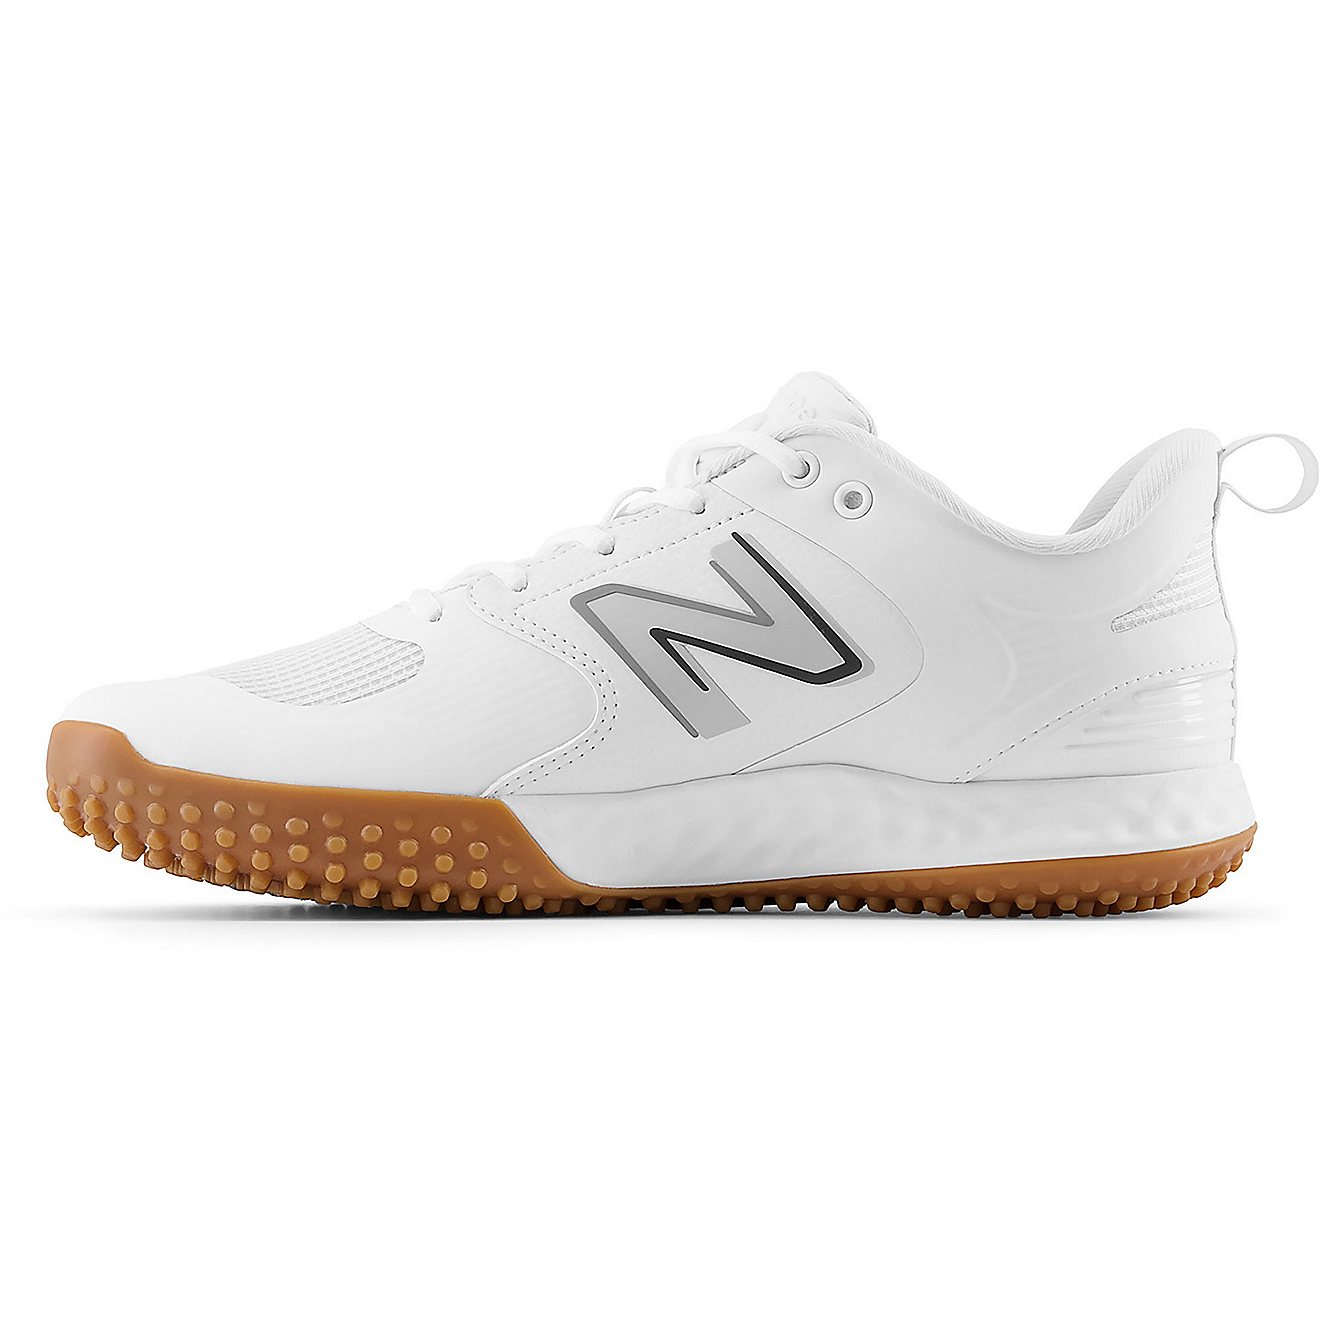 New Balance Men's T3000v6 Turf Baseball Cleats                                                                                   - view number 2